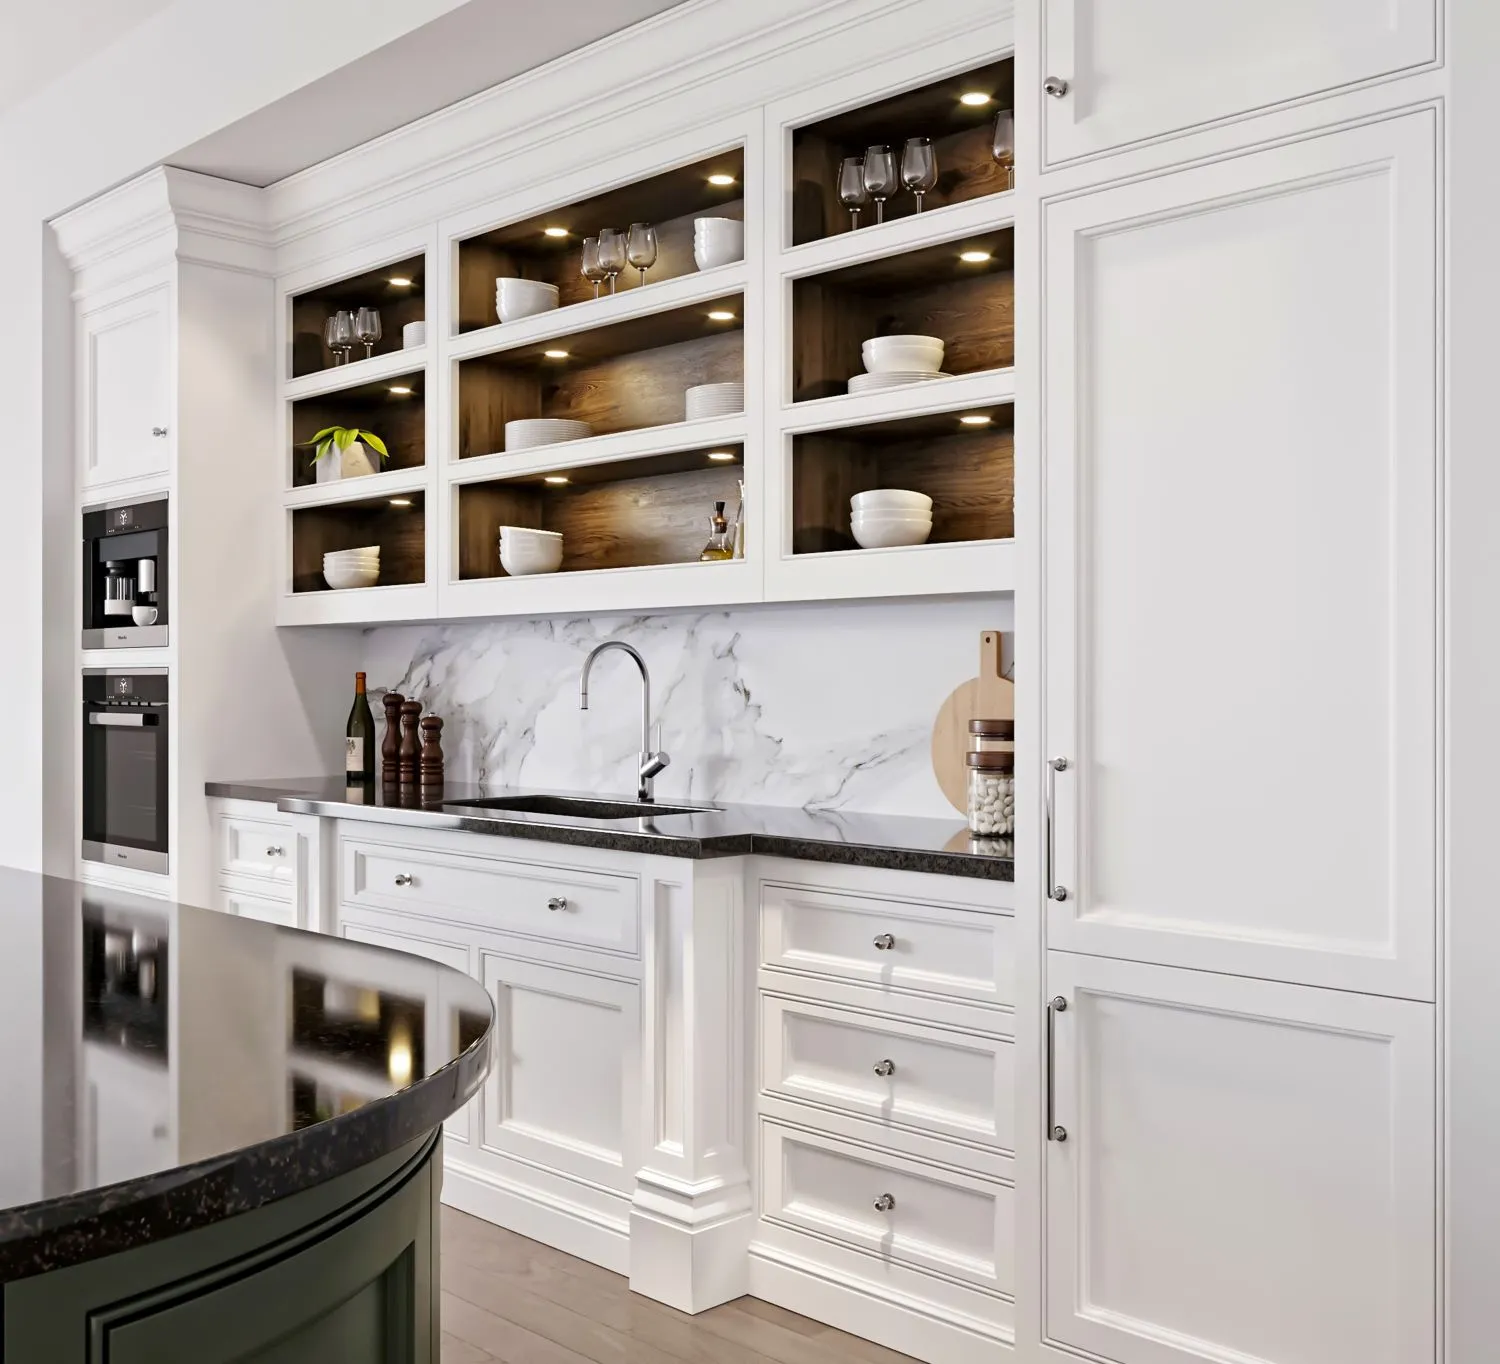 How to Adding More Cabinets to Existing Kitchen - Guilin Cabinet